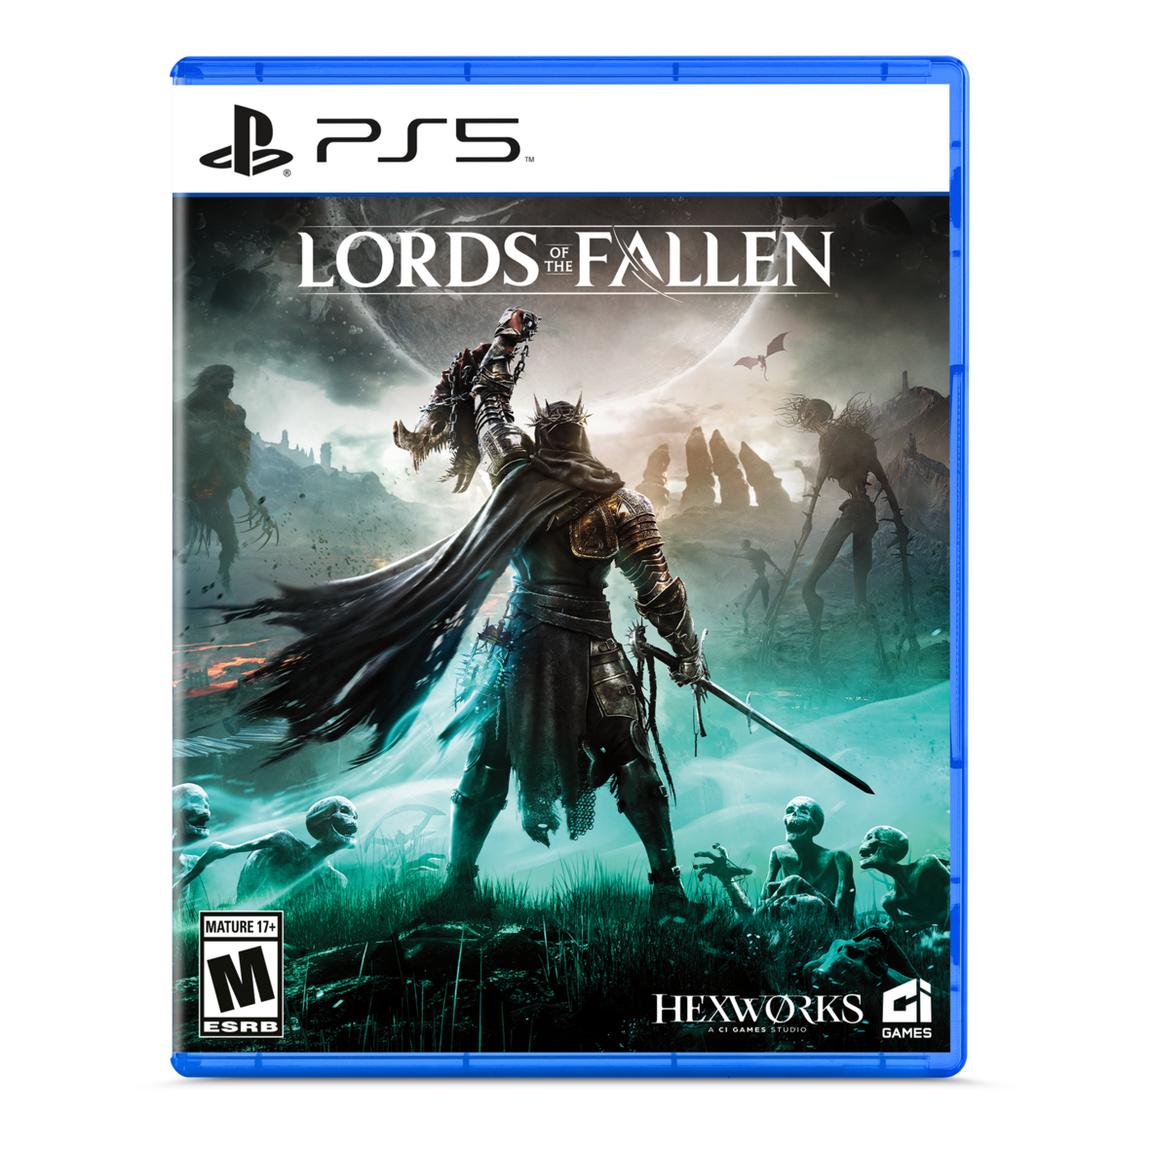 Видеоигра Lords of the Fallen - PlayStation 5 castlevania lords of shadow 2 ps3 английский язык